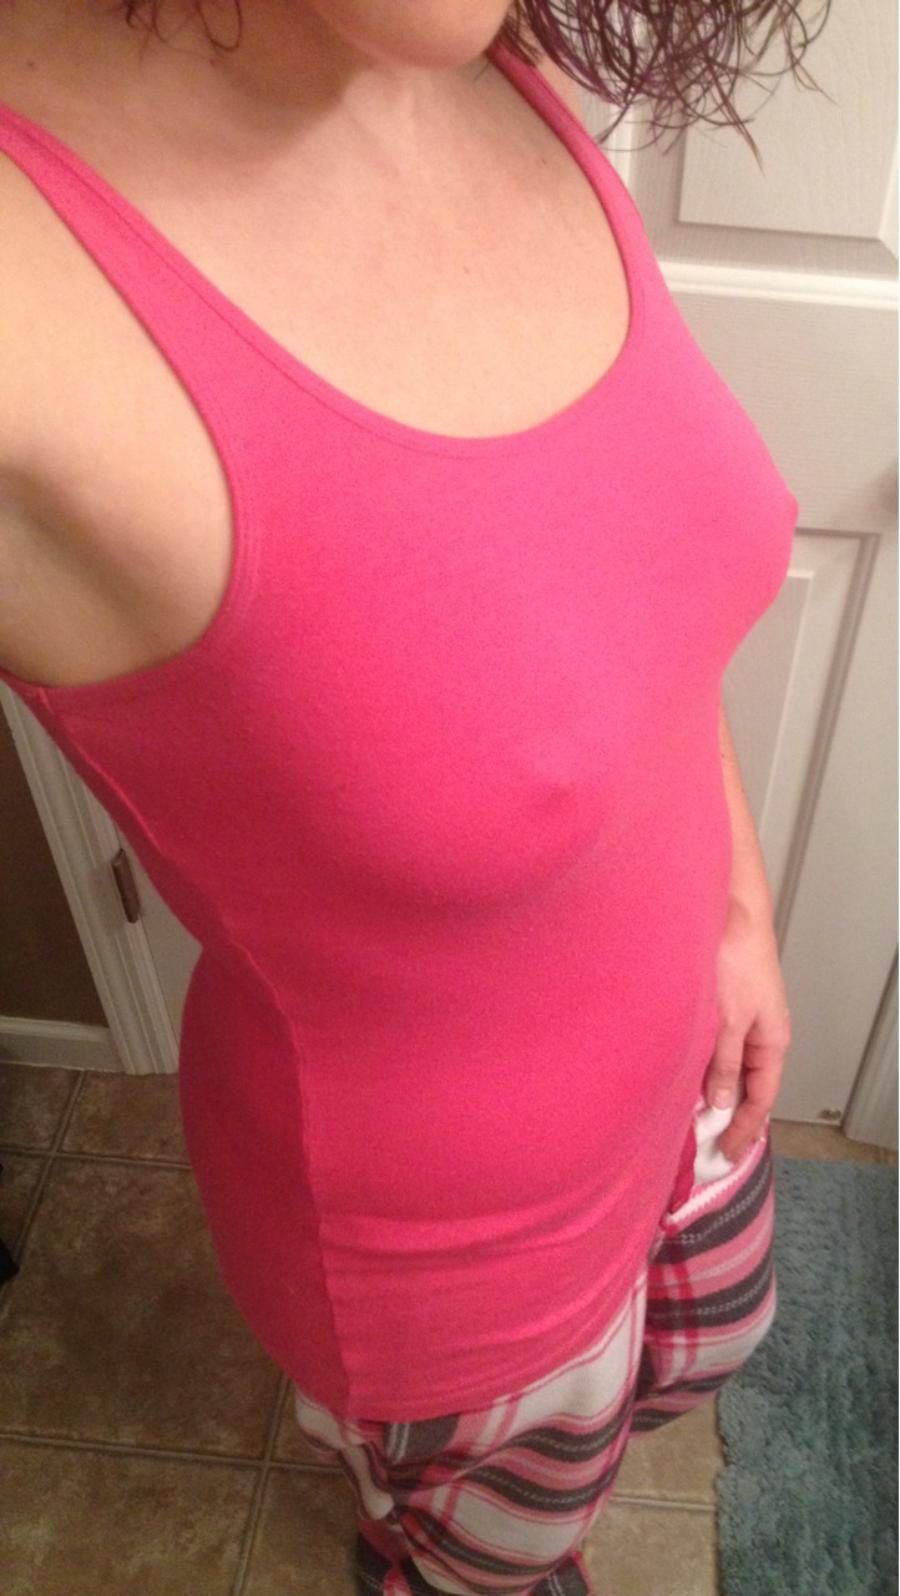 Wife takes Sexy Selfie for Husband at Work